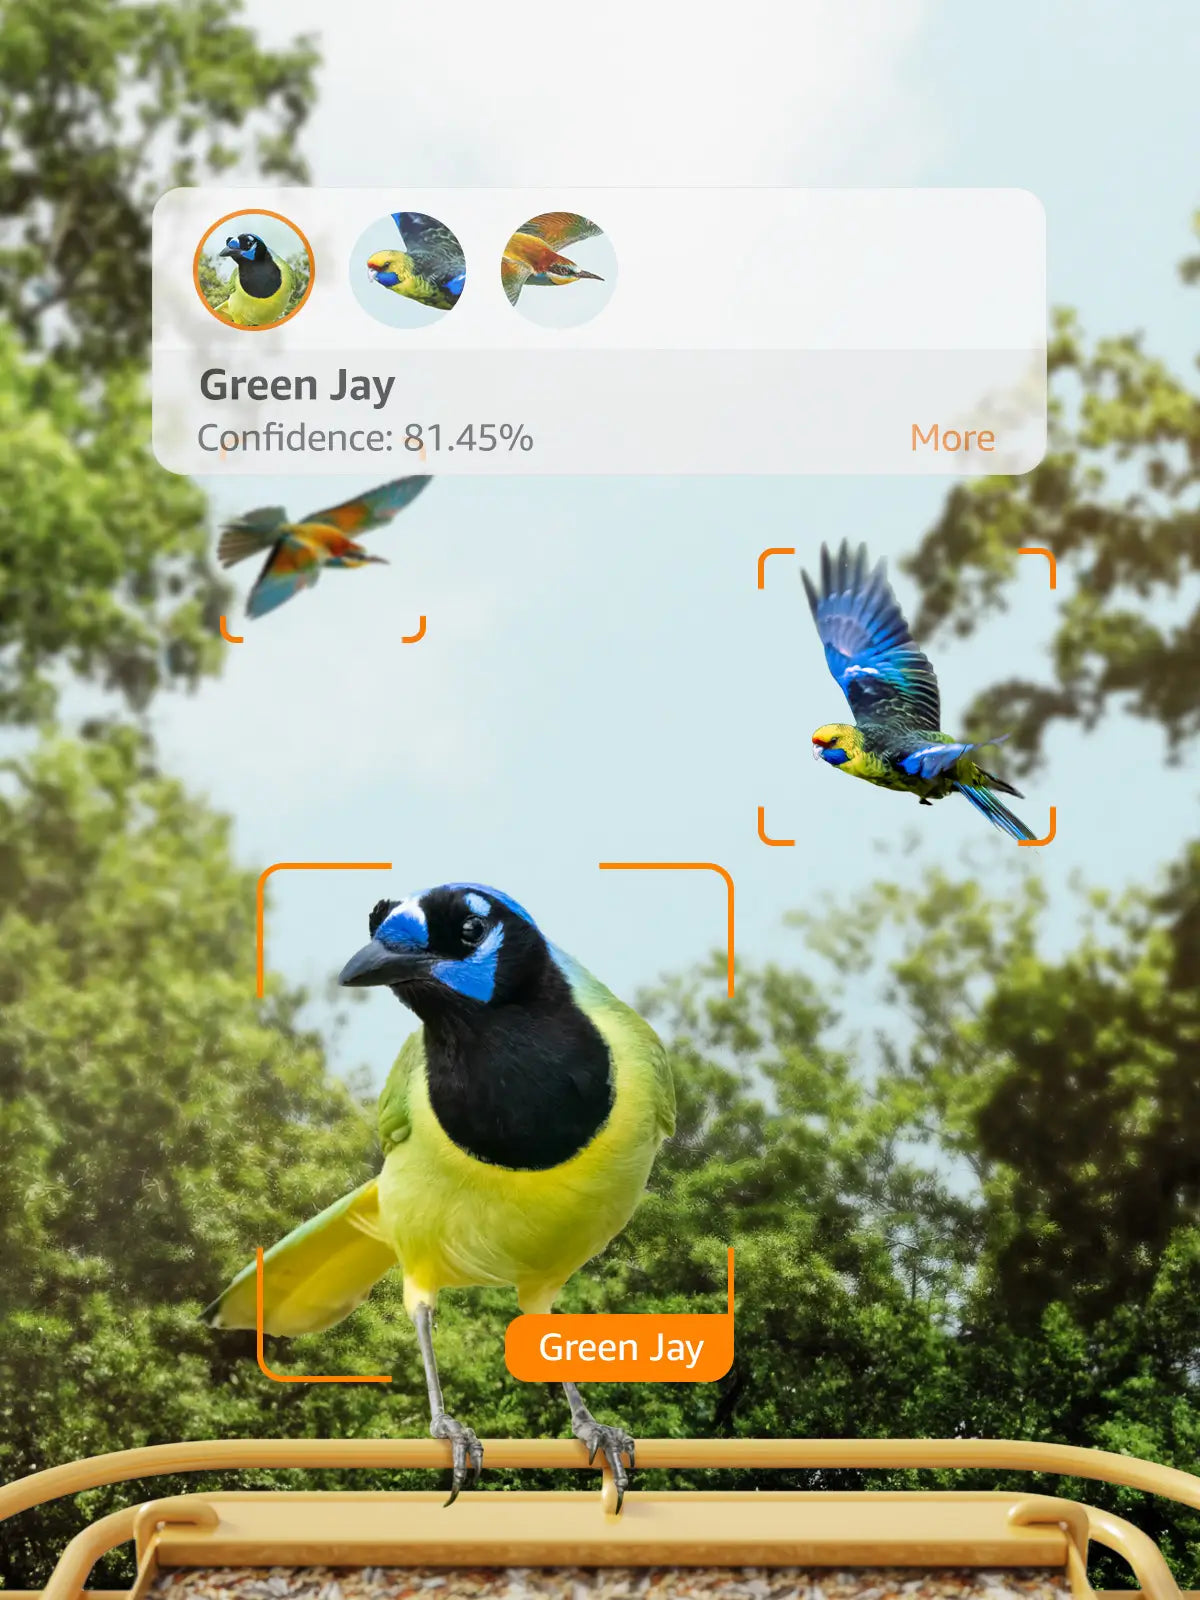 Our AI is smarter and can identify almost all birds. Only works when birds are detected, filtering out junk detections or annoying notifications. It is simply an AI bird expert by your side.